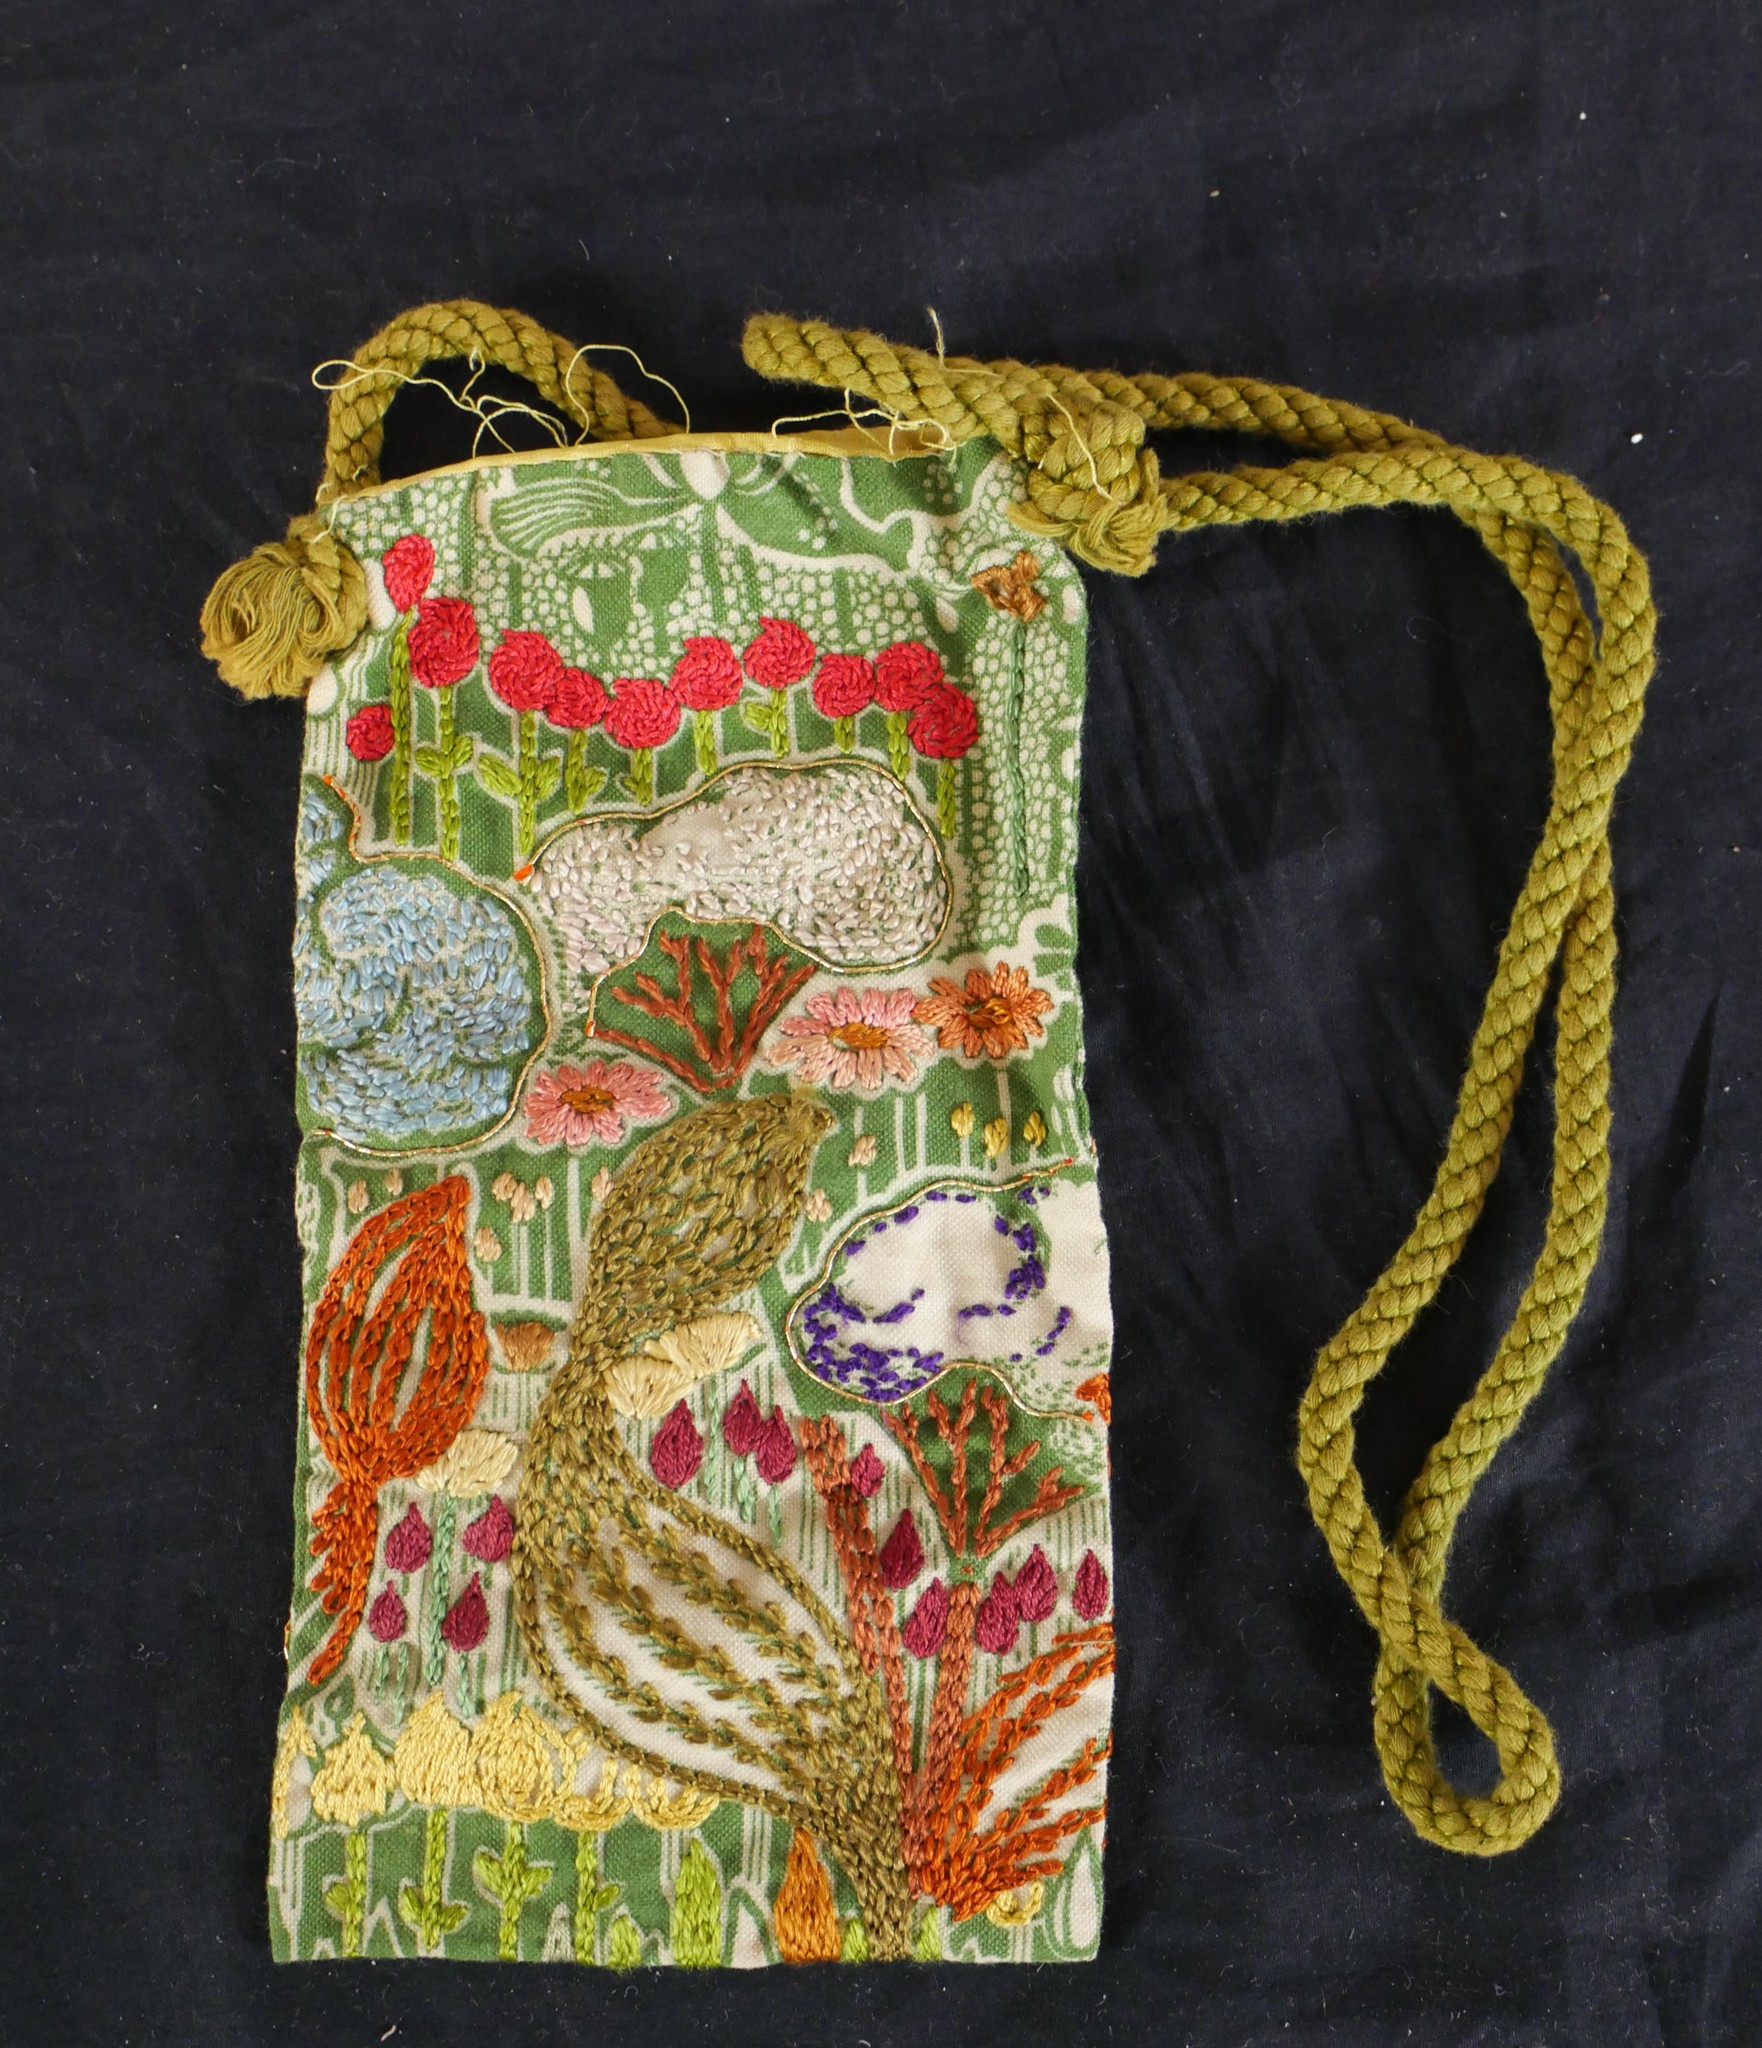 A 19th/ early 20th century sewing kit, together with an embroidered bag and a child's bib. H.27 W. - Image 3 of 6